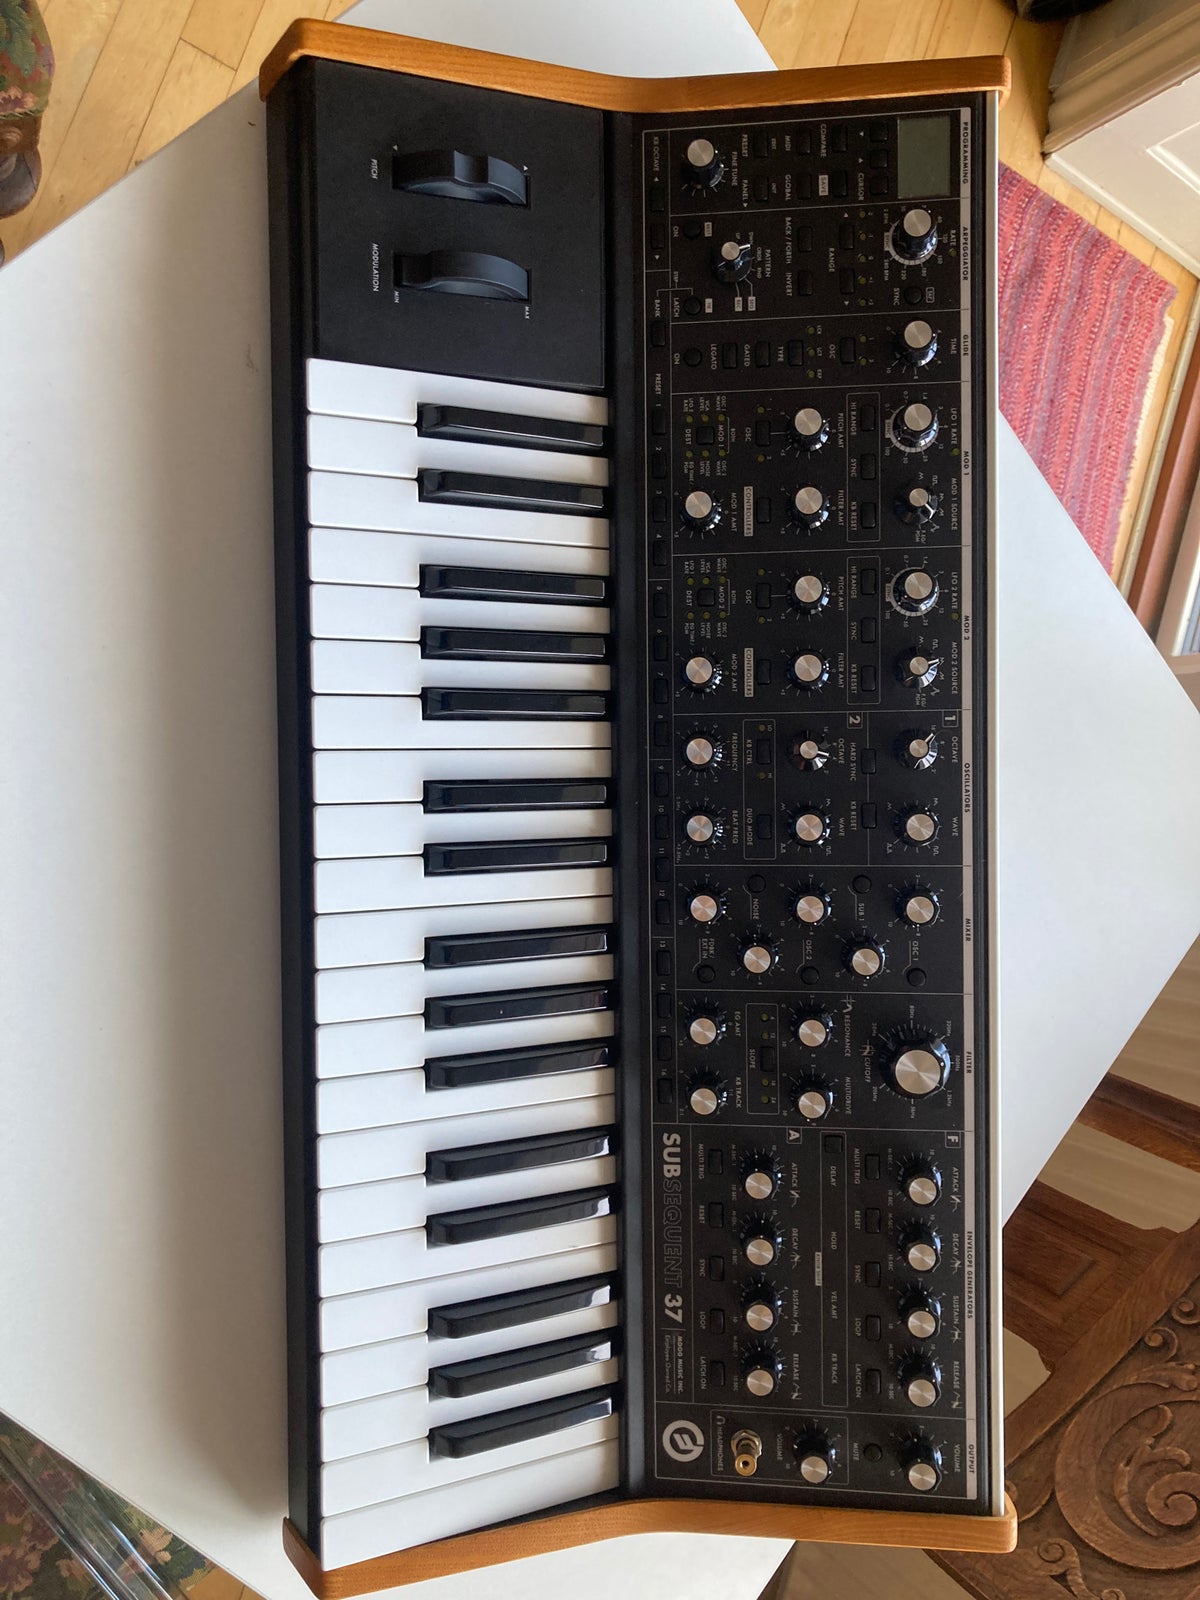 Synthesizer, Moog Subsequent Subsequent 37